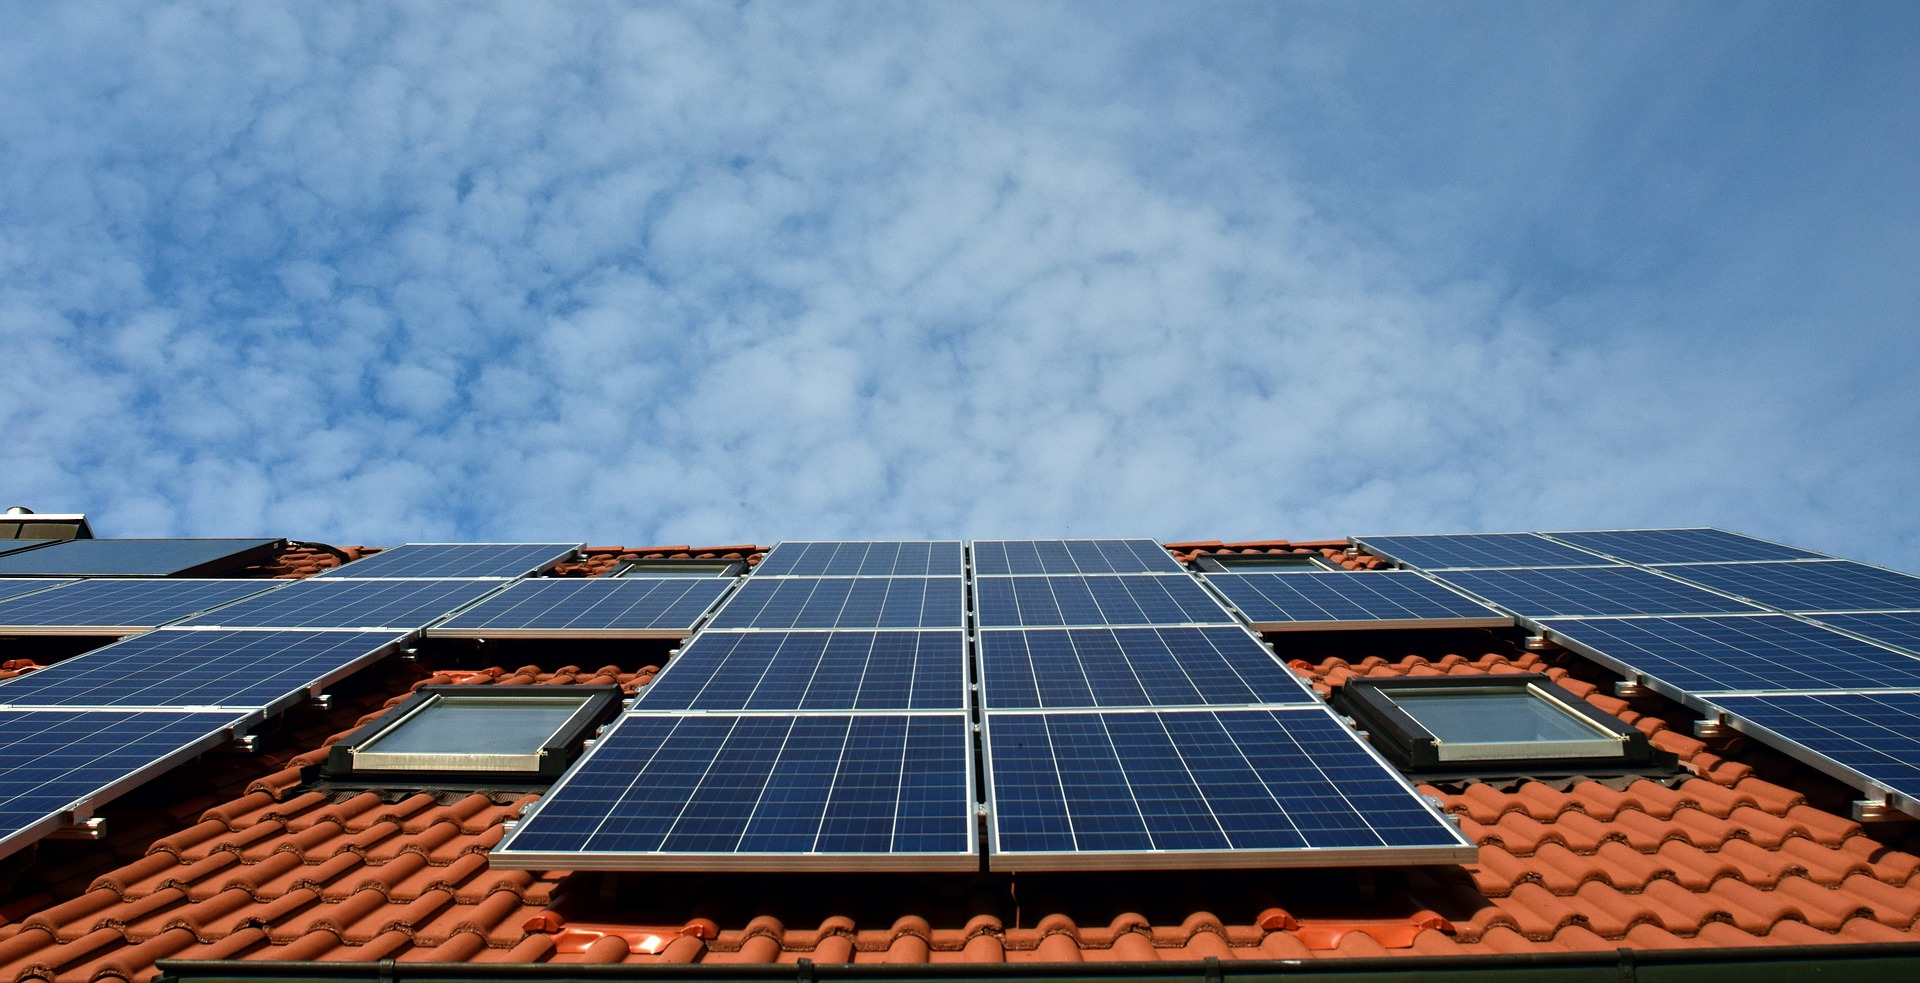 <h3>Rooftop solar energy brings a wide variety of benefits to the grid and to society.</h3><em>Elena Elissena via Shutterstock</em>